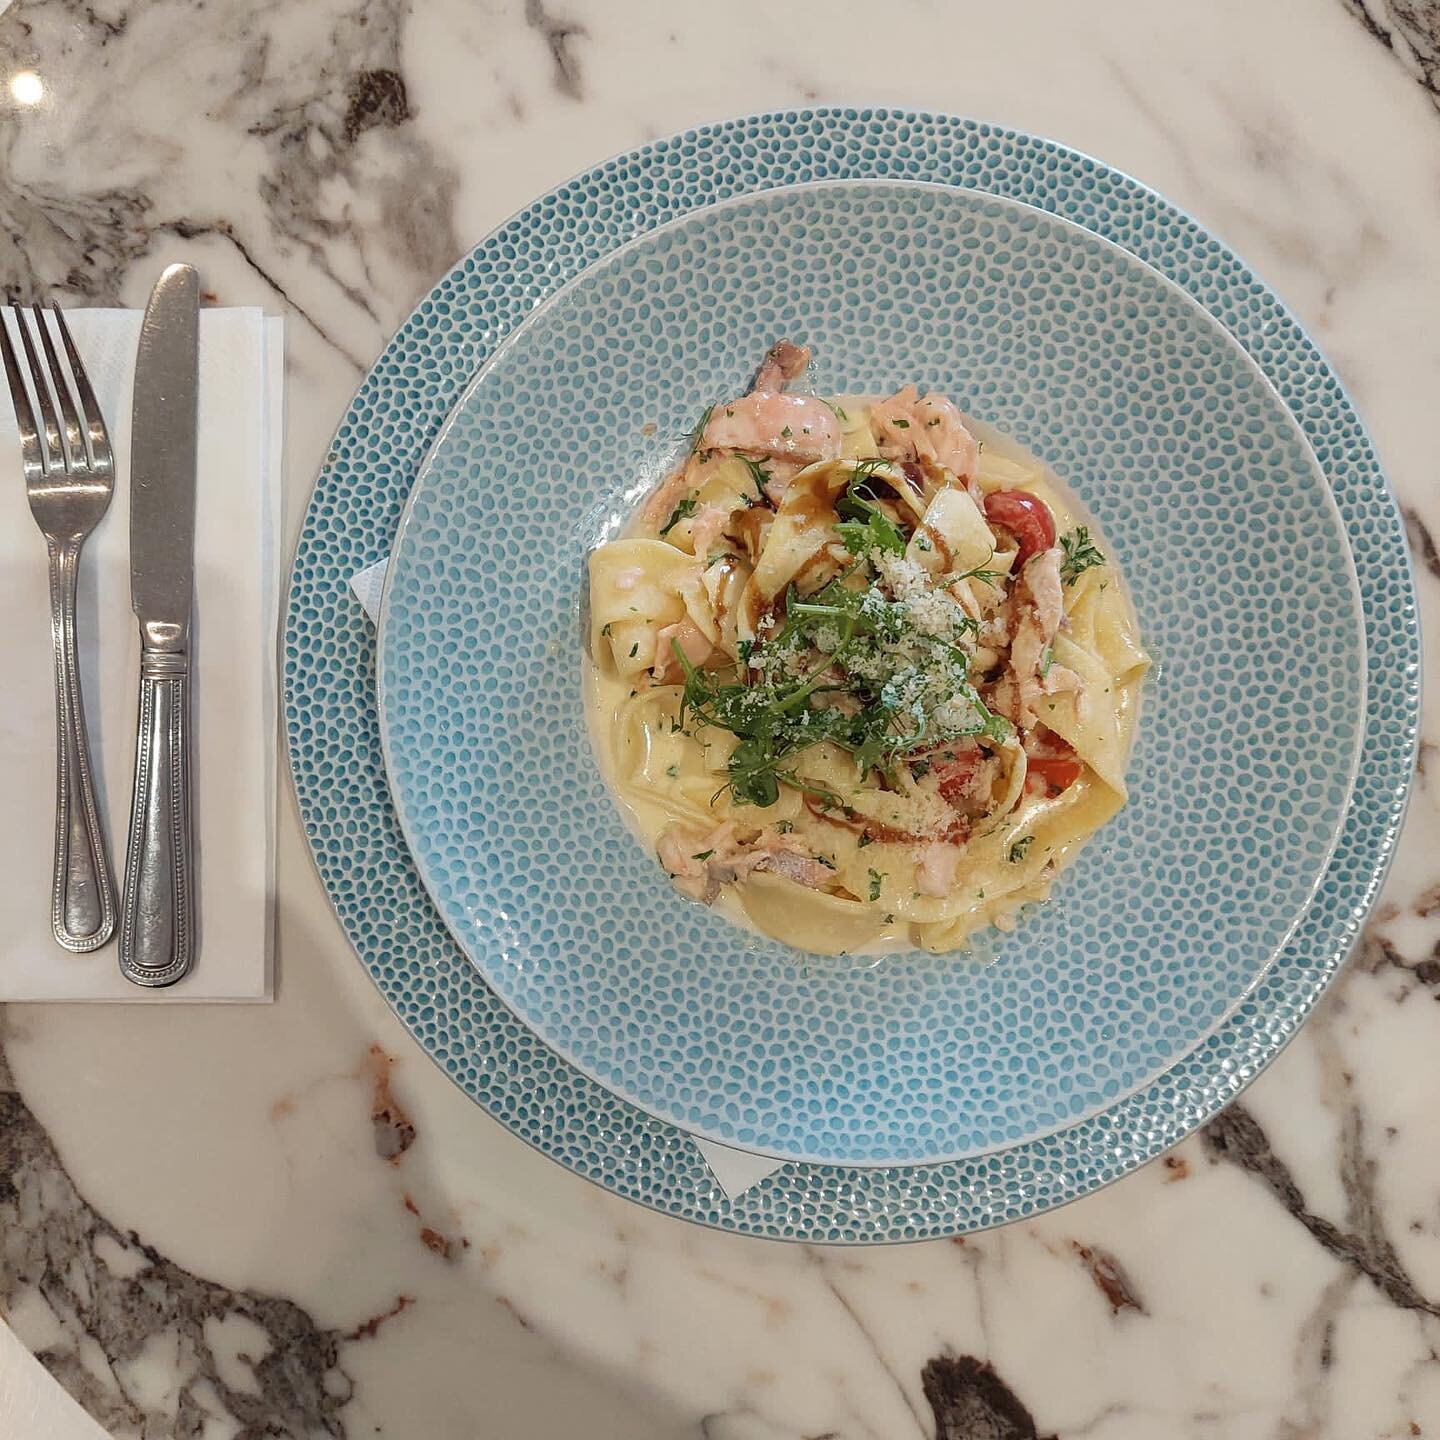 Our popular Salmon tagliatelle is being served on the lunch menu daily. 

#lunch #lunchmenu #upstairsatannas #conwy #lunchideas